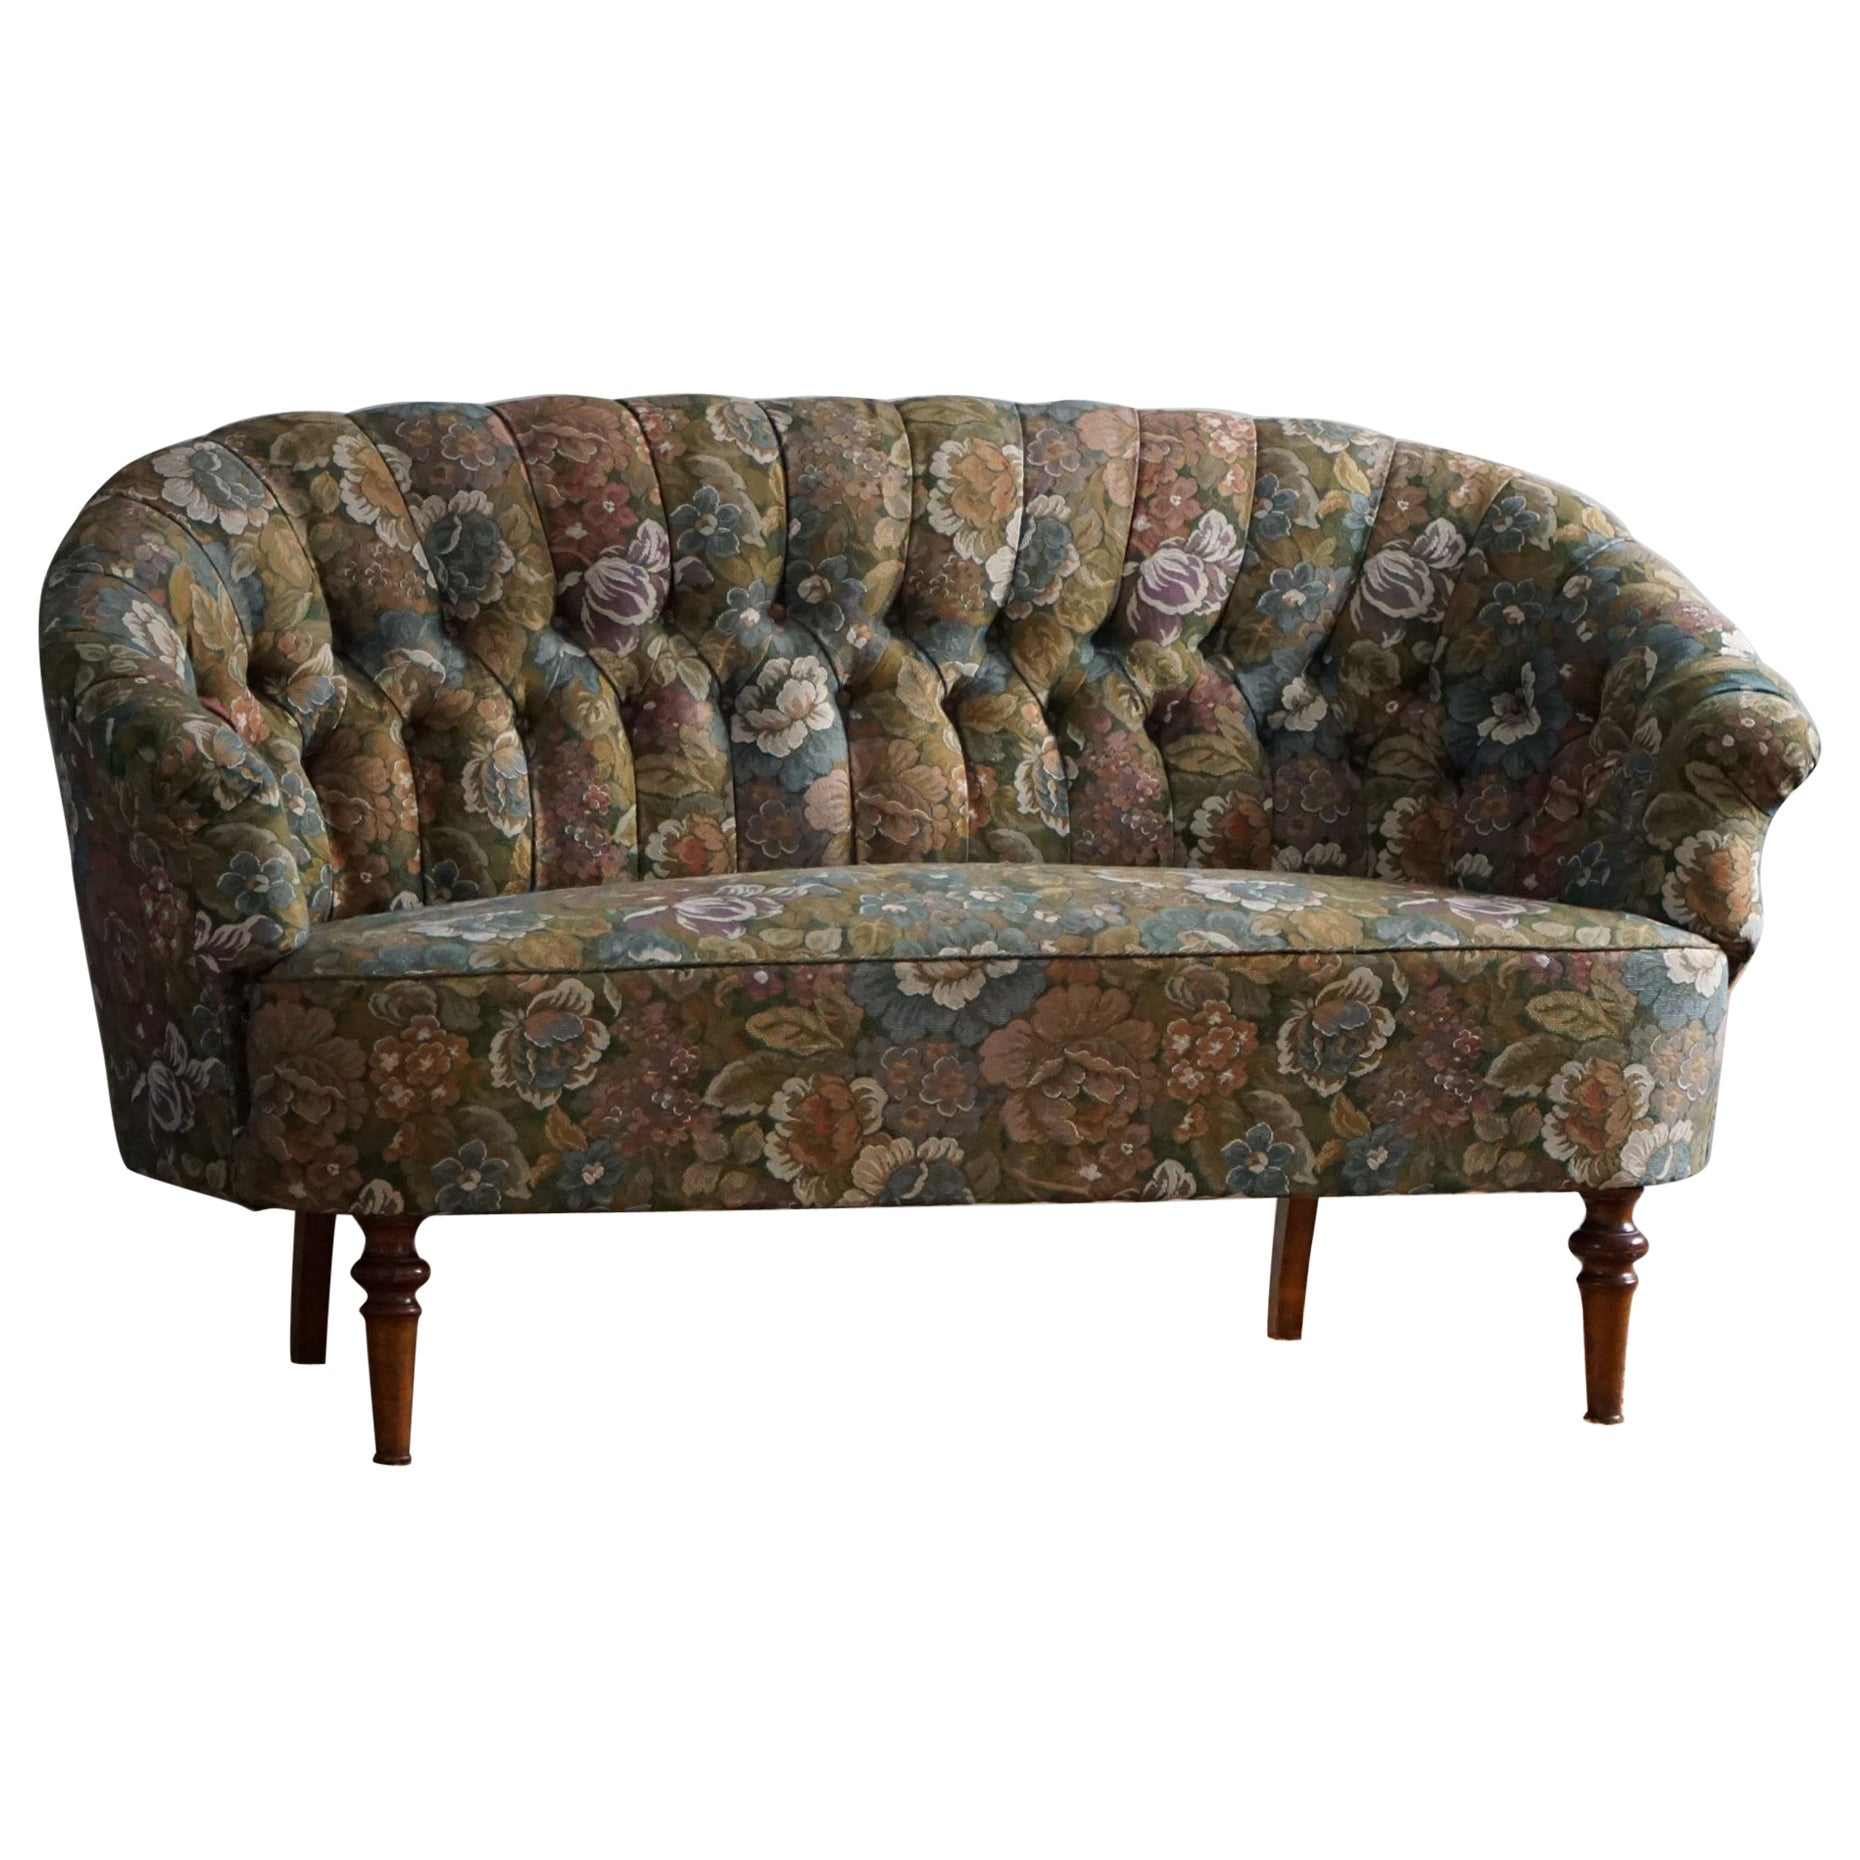 Antique Curved Sofa with Flora Fabric, By a Danish Cabinetmaker, Early 1900s